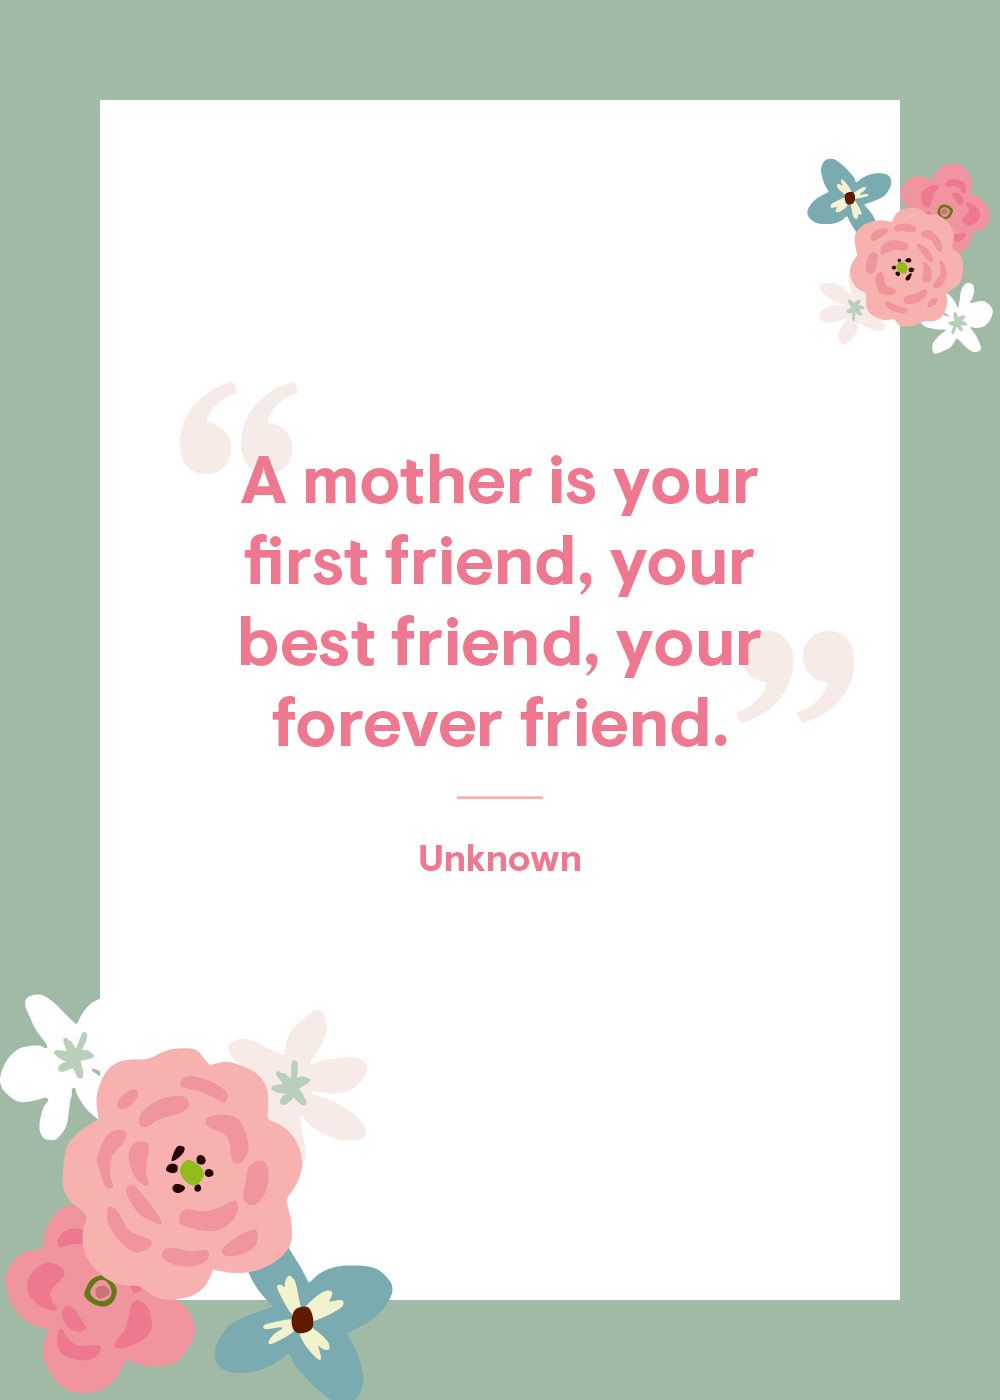 61 Best Mother's Day Quotes - Inspiring Quotes About Moms